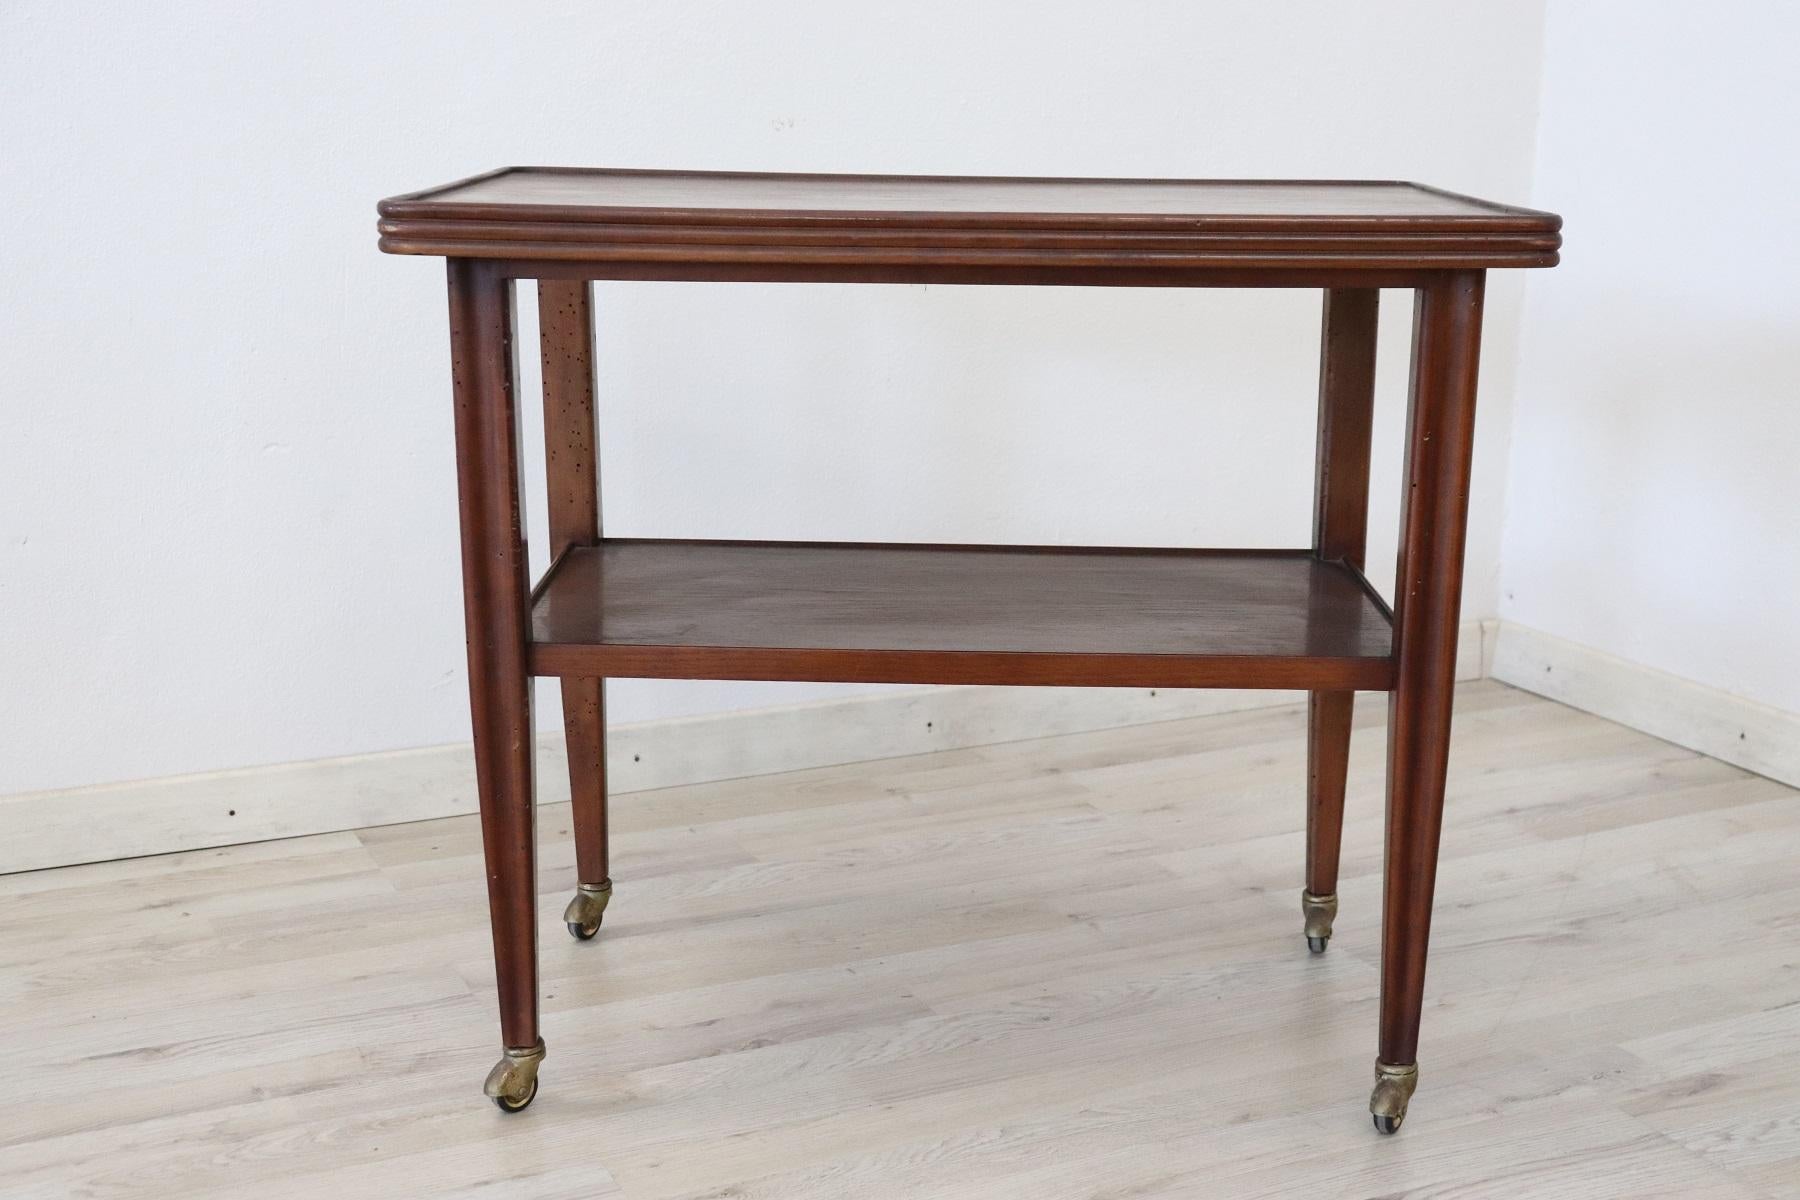 Rare drinks trolley Italian design by Osvaldo Borsani produced in Italy in the 1940s, It is made of oak wood. At the foot of the comfortable brass wheels they allow easy movement. Perfect for serving drinks to your guests.
 